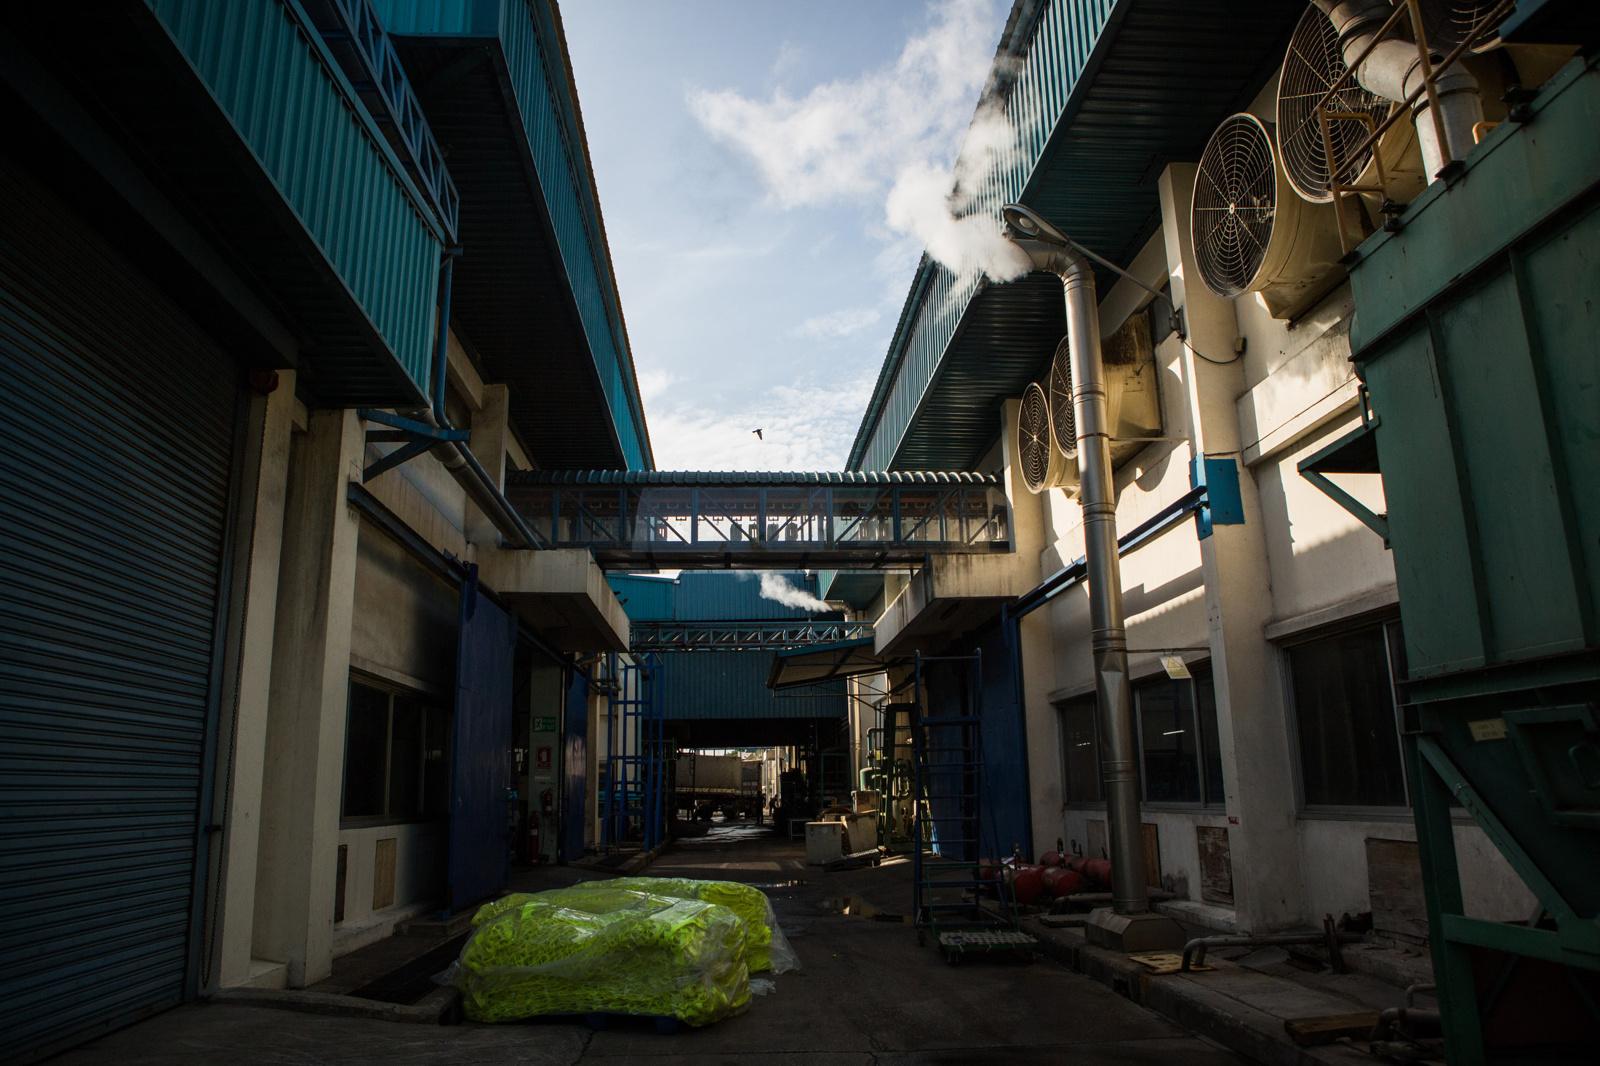 Wilson Tennis Ball Factory - For The New York Times - Nakhon Pathom, Thailand Ð August 18, 2016 : Over 100...